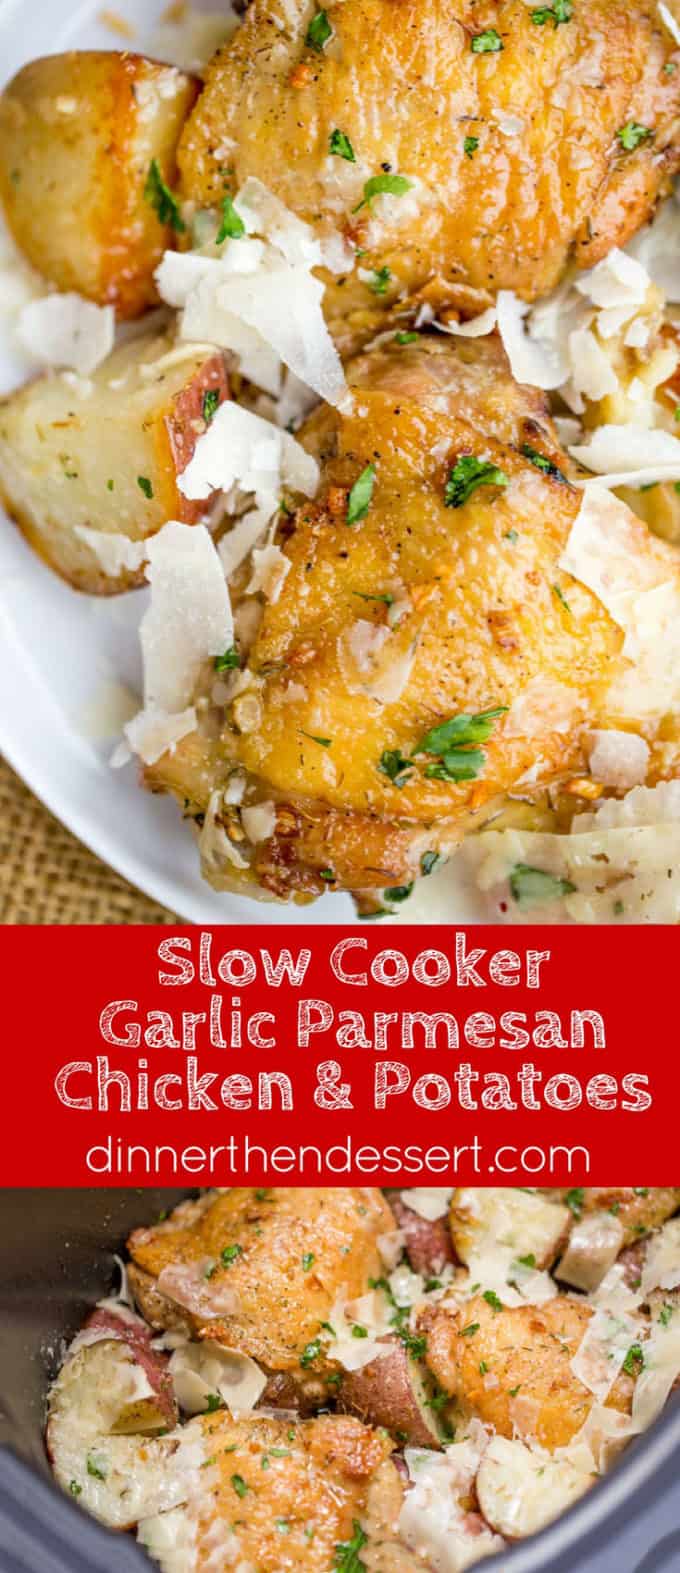 Slow Cooker Garlic Parmesan Chicken and Potatoes takes just a few minutes of prep and five ingredients. Crisp chicken thighs, buttery red potatoes and shaved Parmesan cheese make the perfect easy weeknight meal.